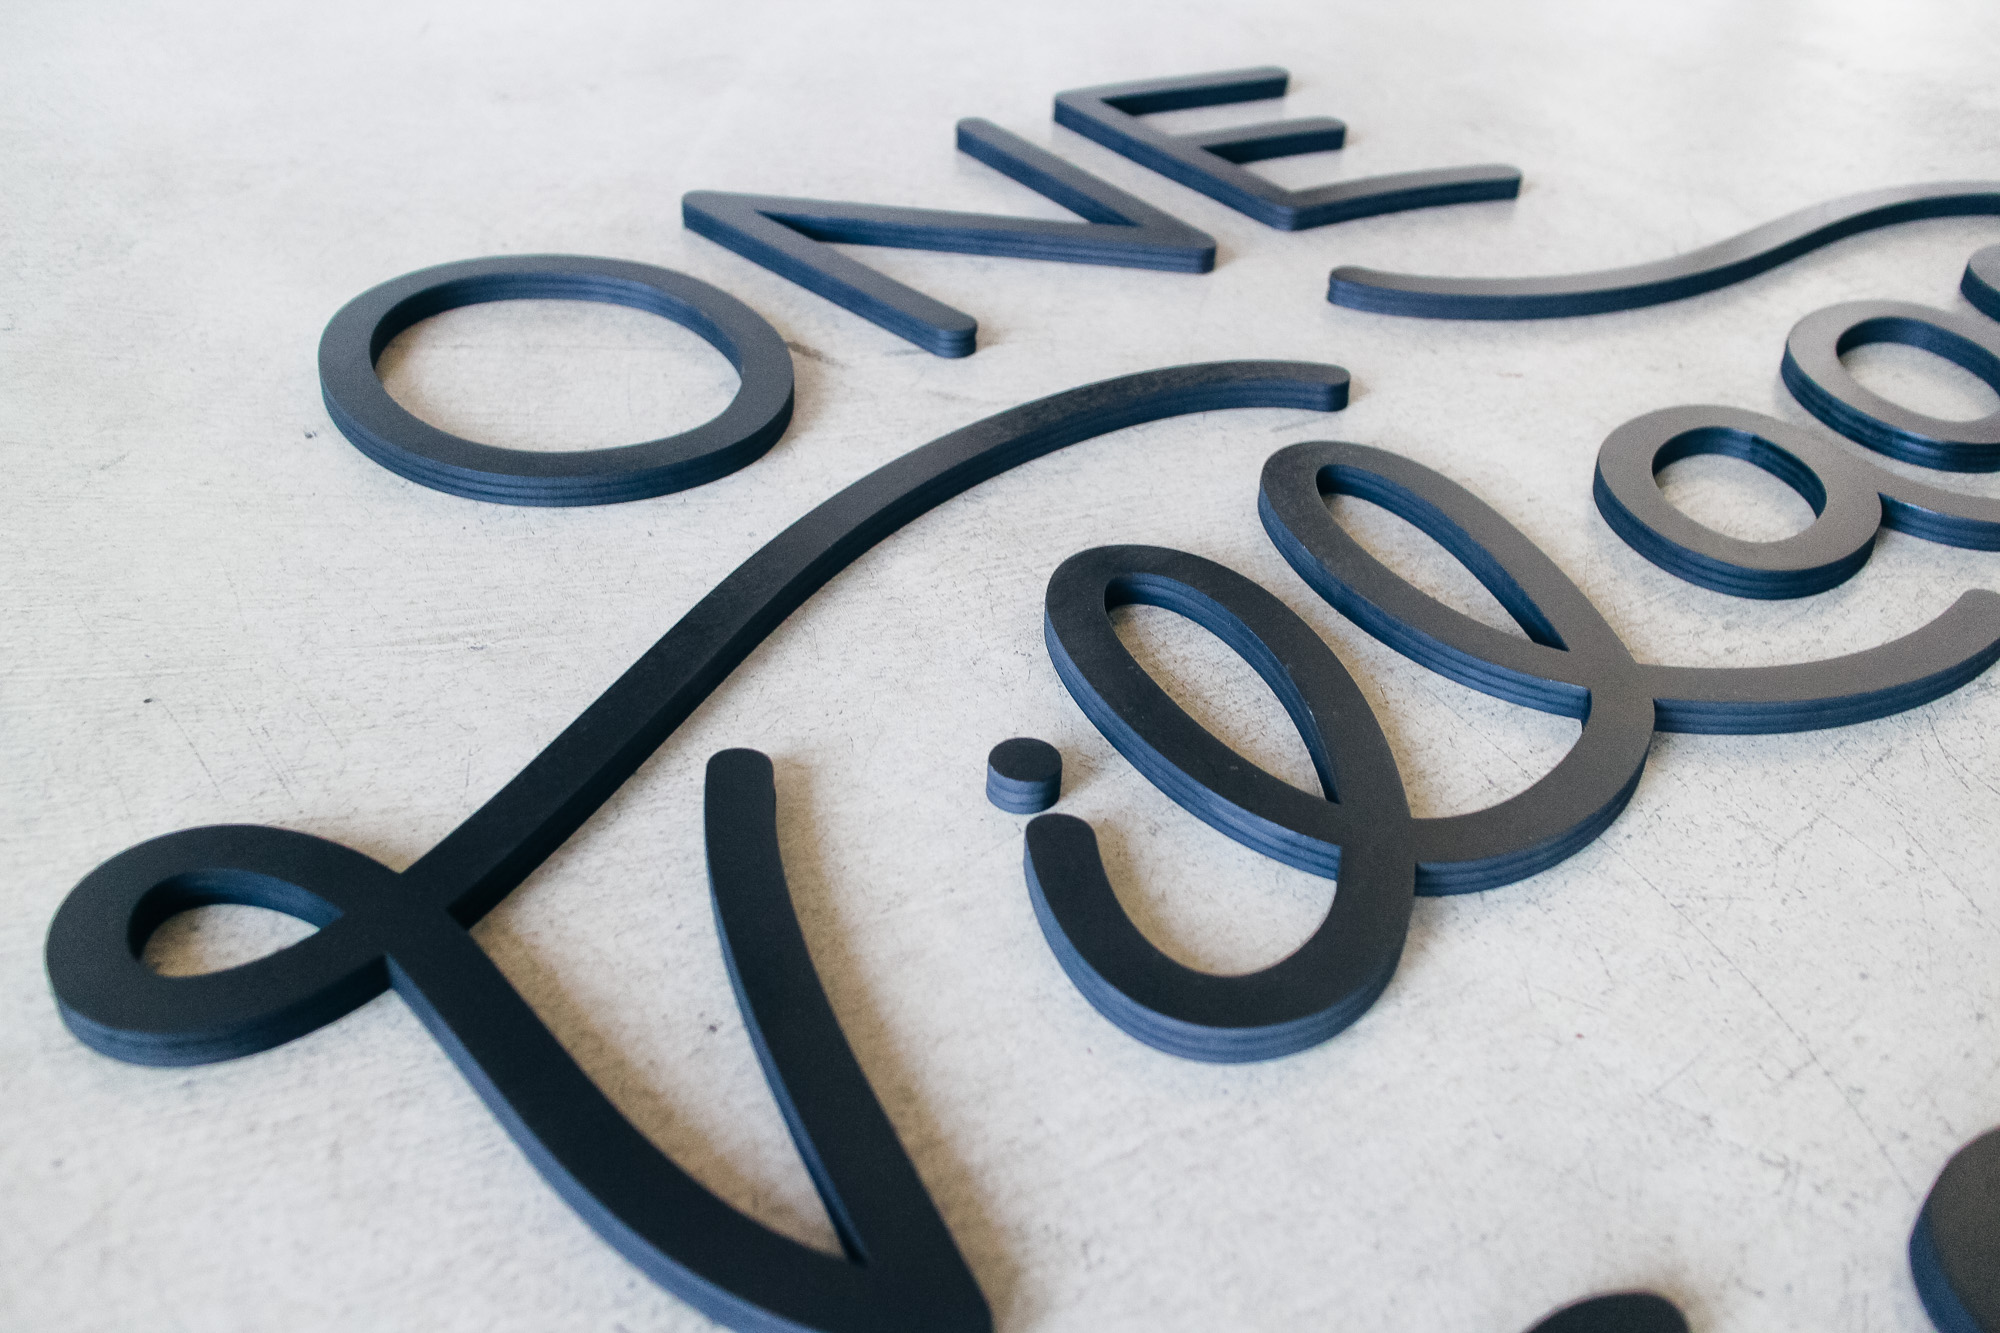 Black script sign for One Village Coffee, a specialty coffee roaster based in Souderton, PA.